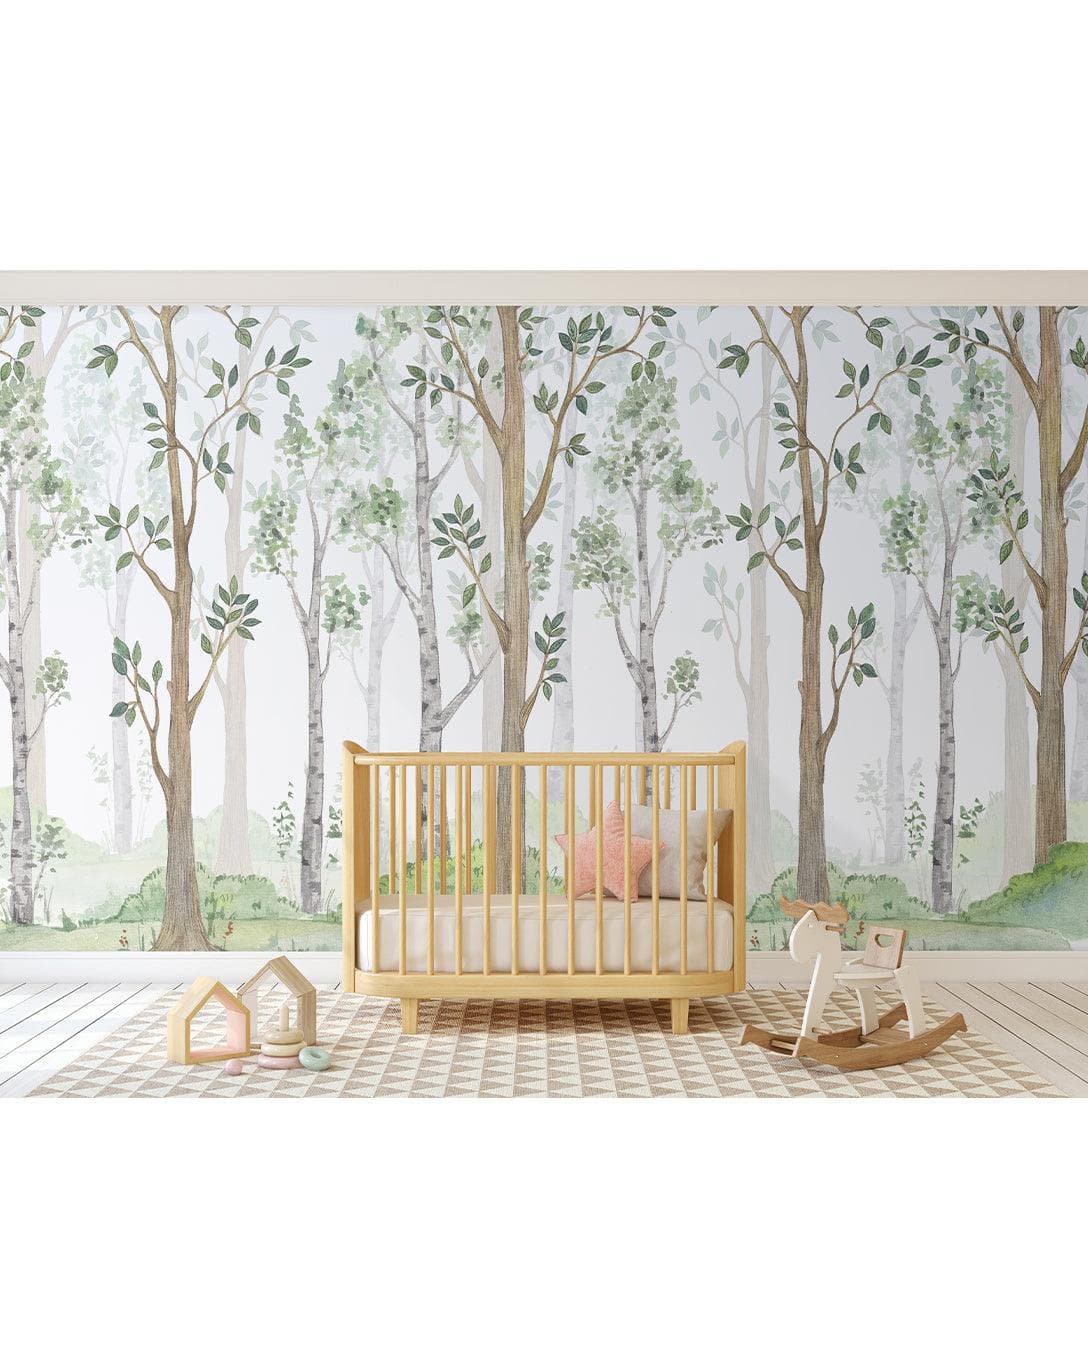 Fairy Misty Forest Kids Room Wall Mural 